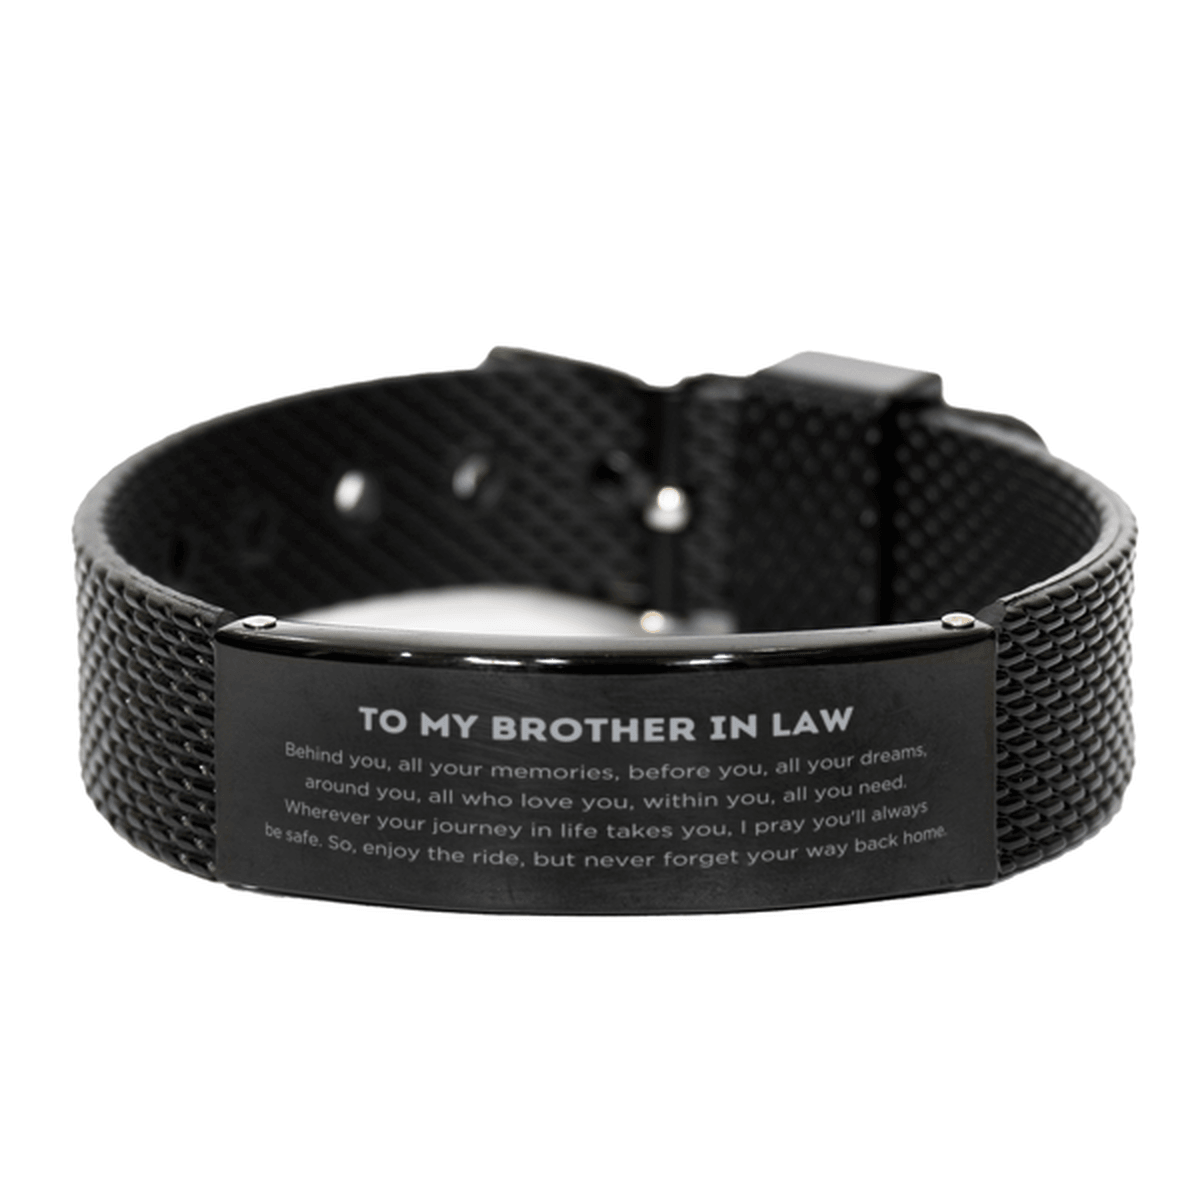 To My Brother In Law Gifts, Inspirational Brother In Law Black Shark Mesh Bracelet, Sentimental Birthday Christmas Unique Gifts For Brother In Law Behind you, all your memories, before you, all your dreams, around you, all who love you, within you, all yo - Mallard Moon Gift Shop